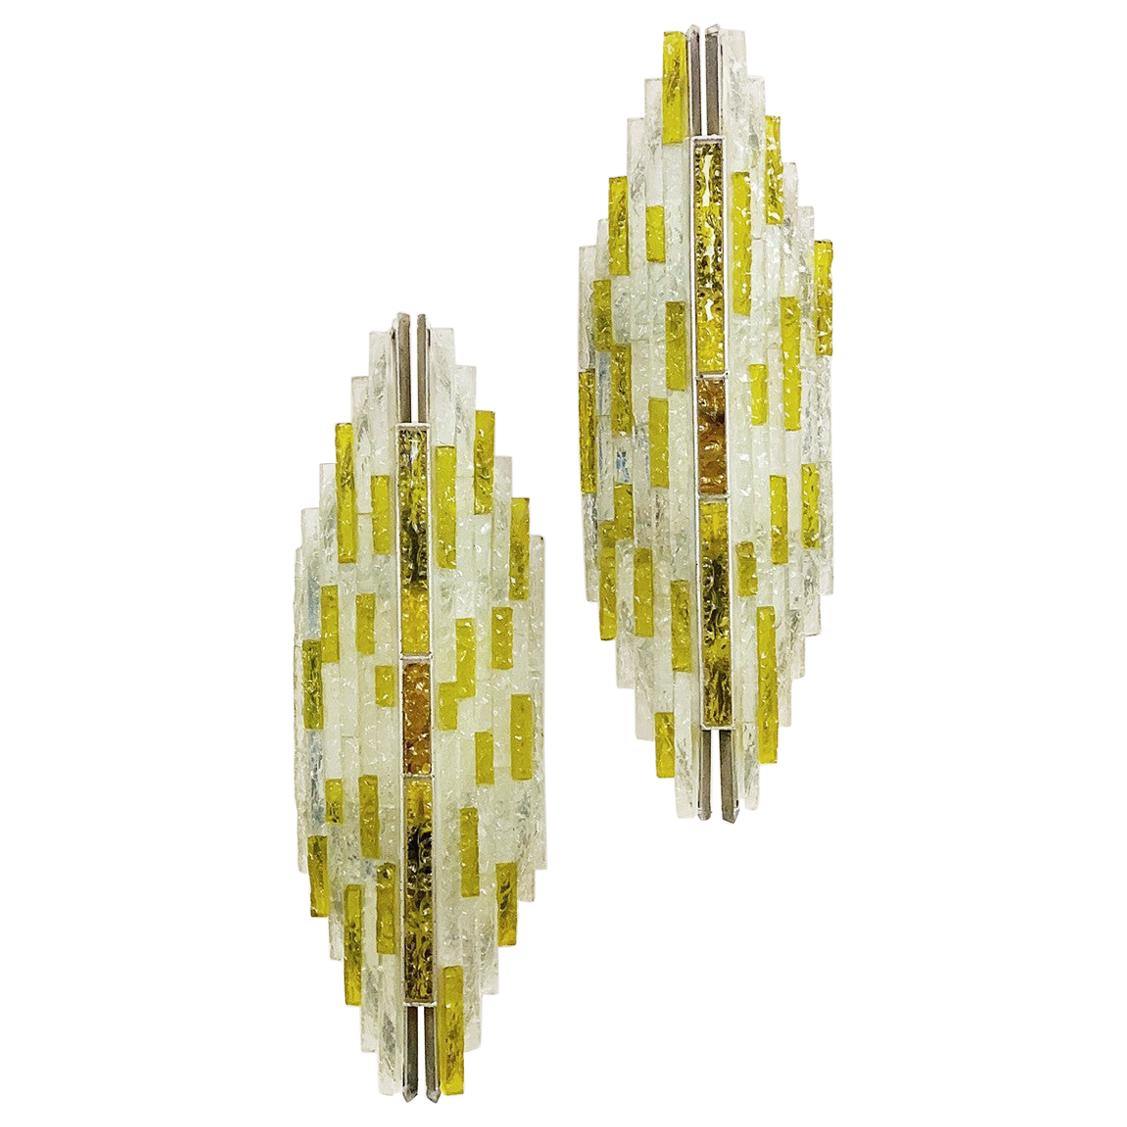 Pair of Brutalist Sconces by Albano Poli for Poliarte, 1970s